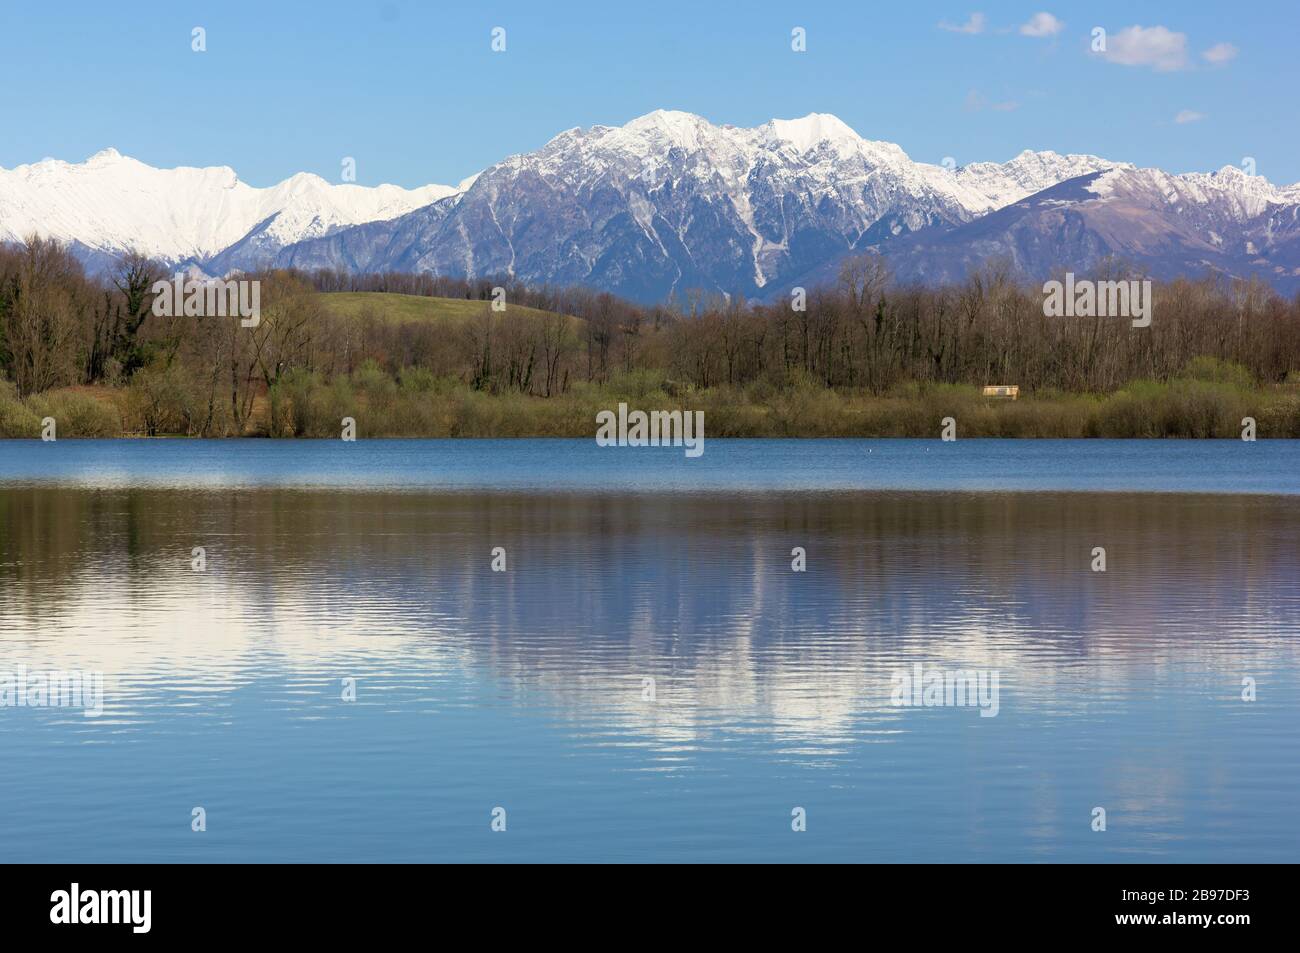 Small lake of Ragogna, near San Daniele del Friuli, Italy, in late winter, with the snow-capped mountains in the background Stock Photo